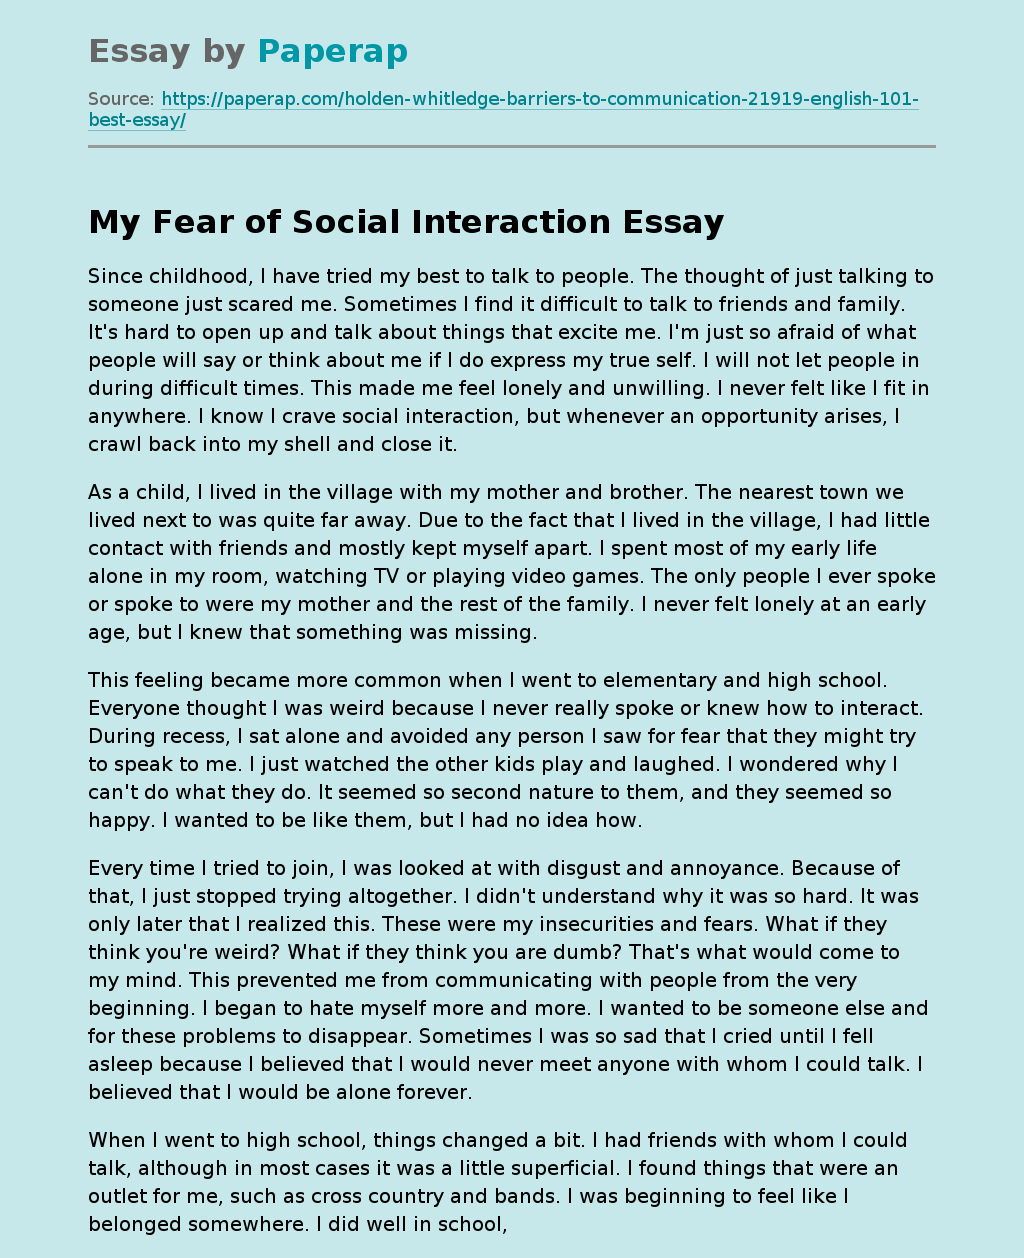 My Fear of Social Interaction